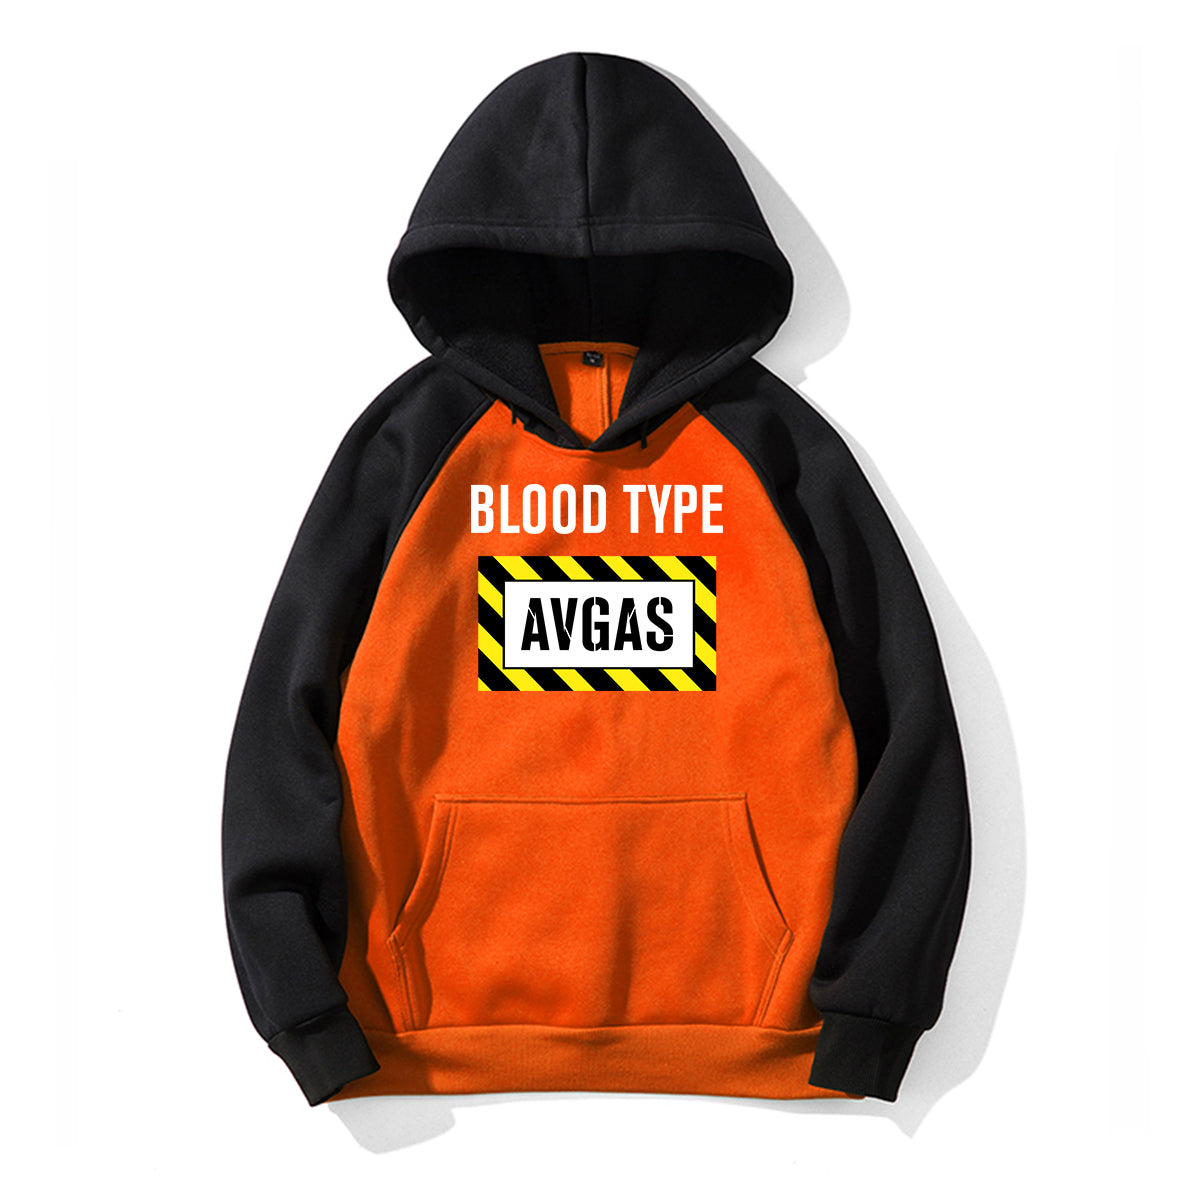 Blood Type AVGAS Designed Colourful Hoodies